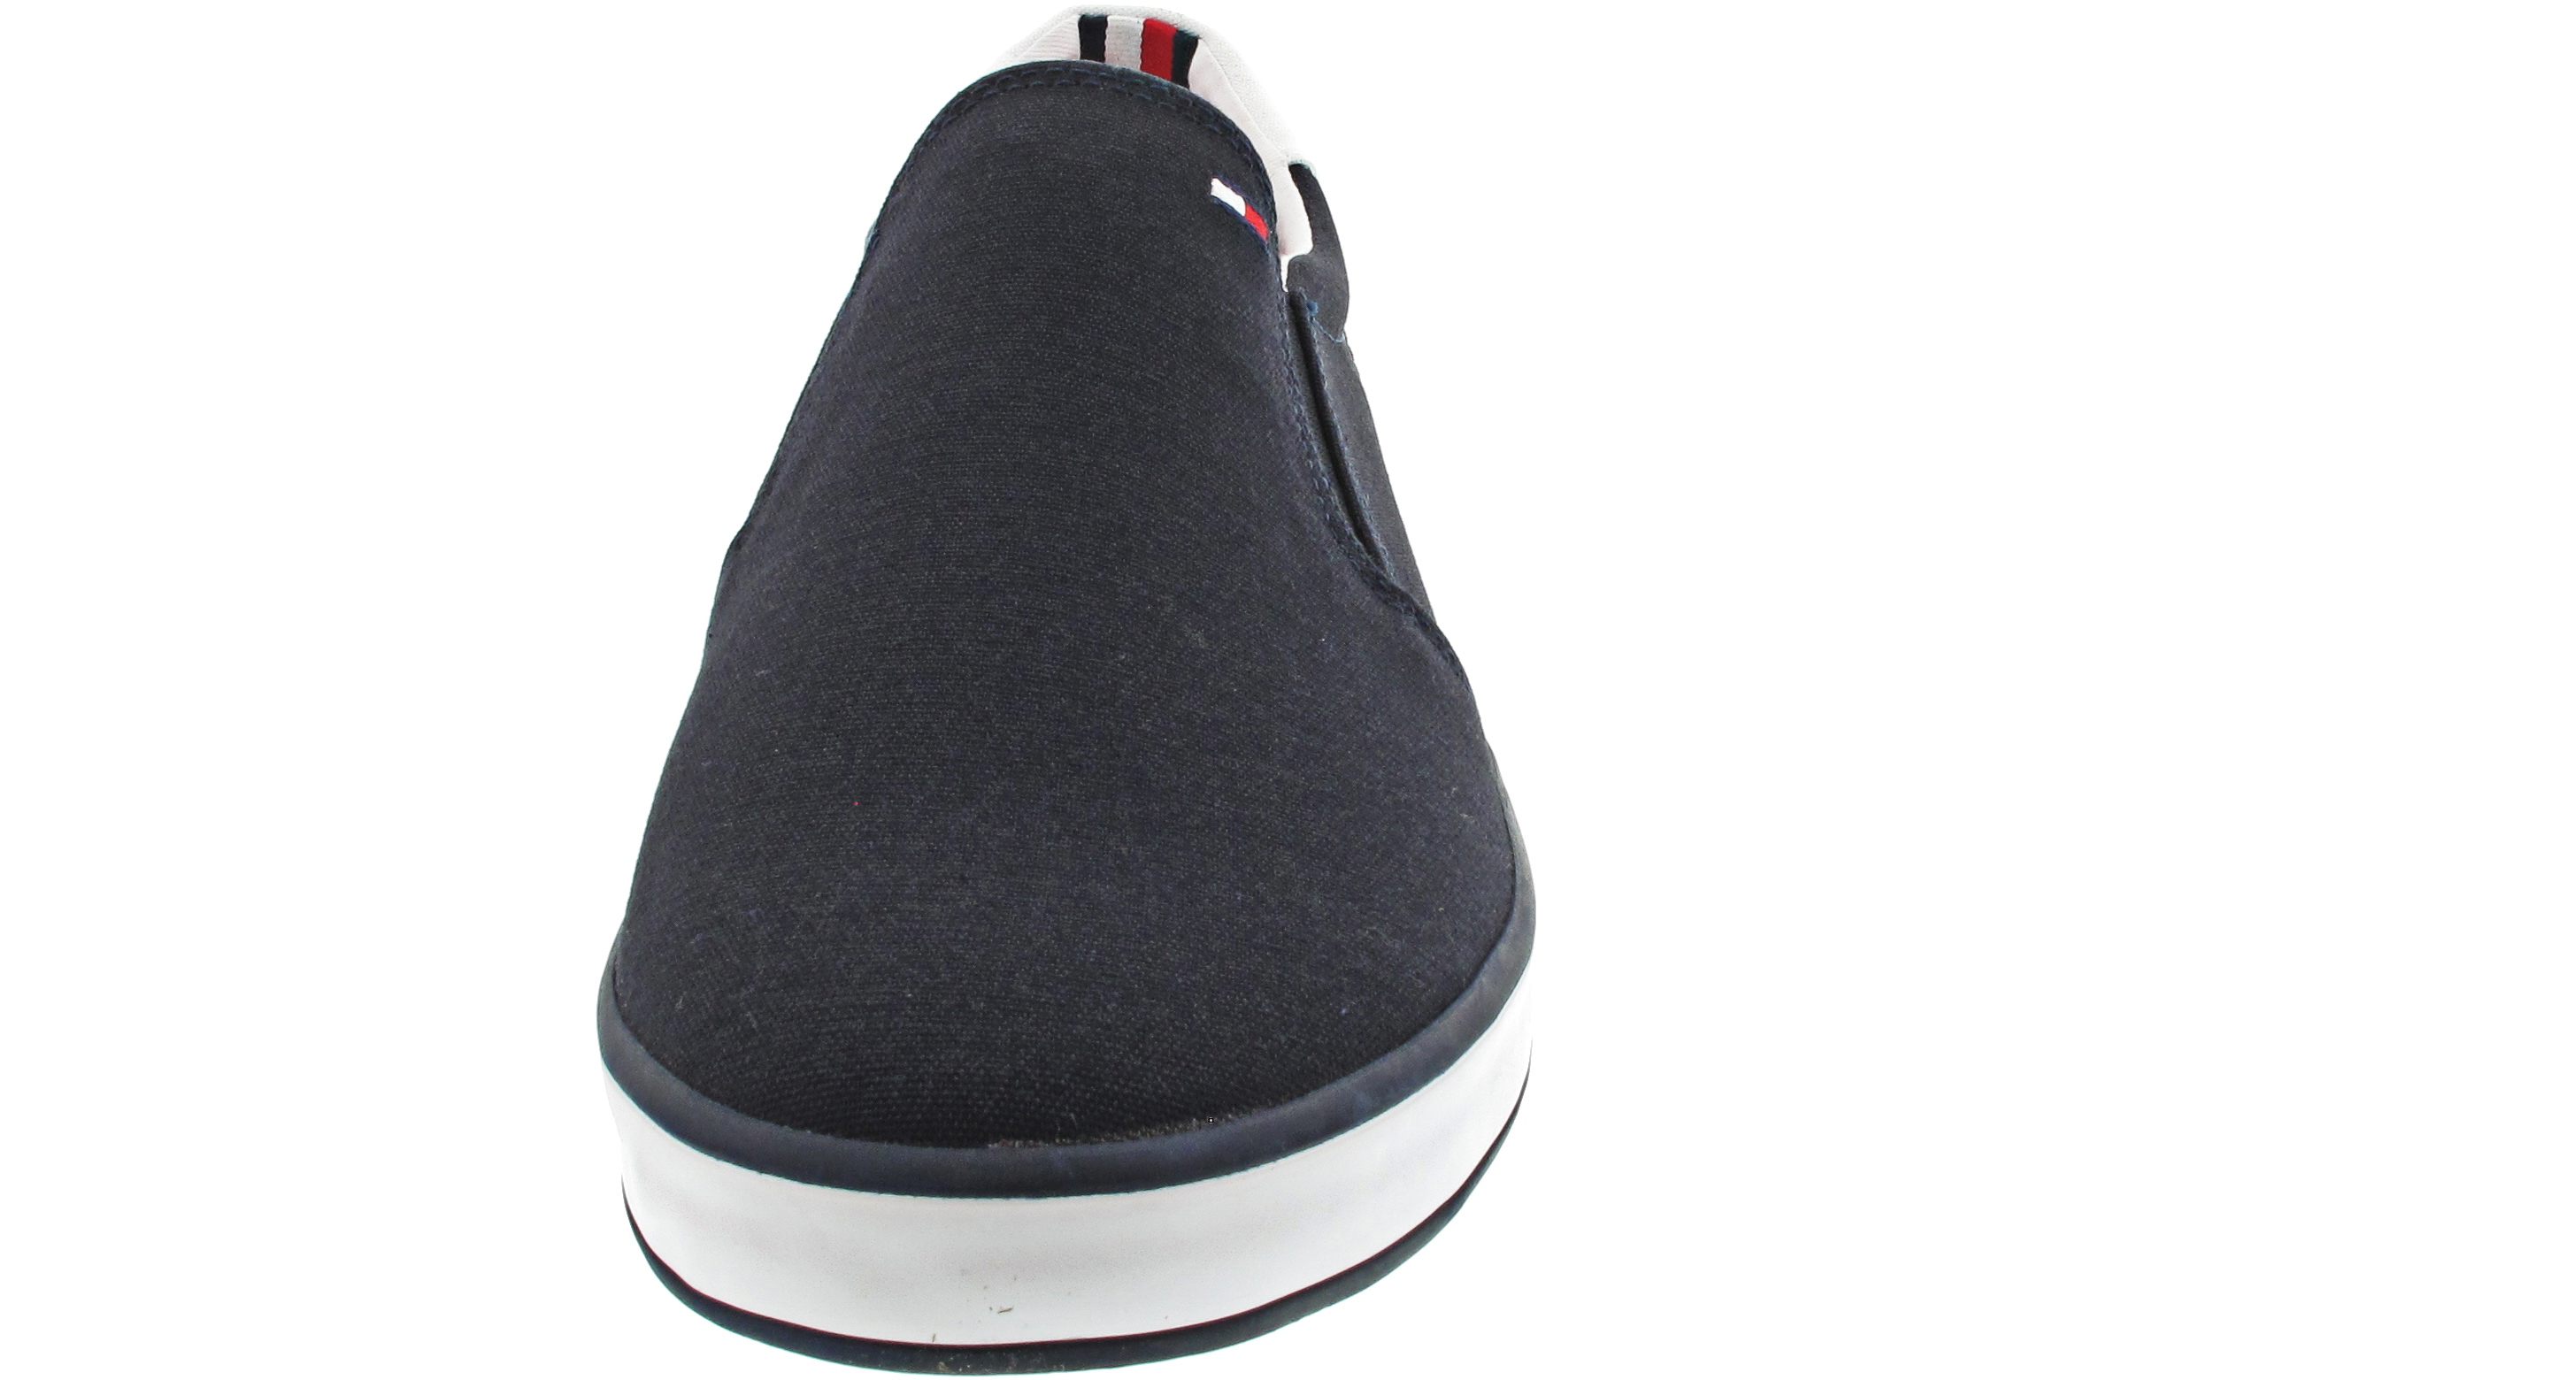 Tommy Hilfiger Iconic Slip on Sneaker